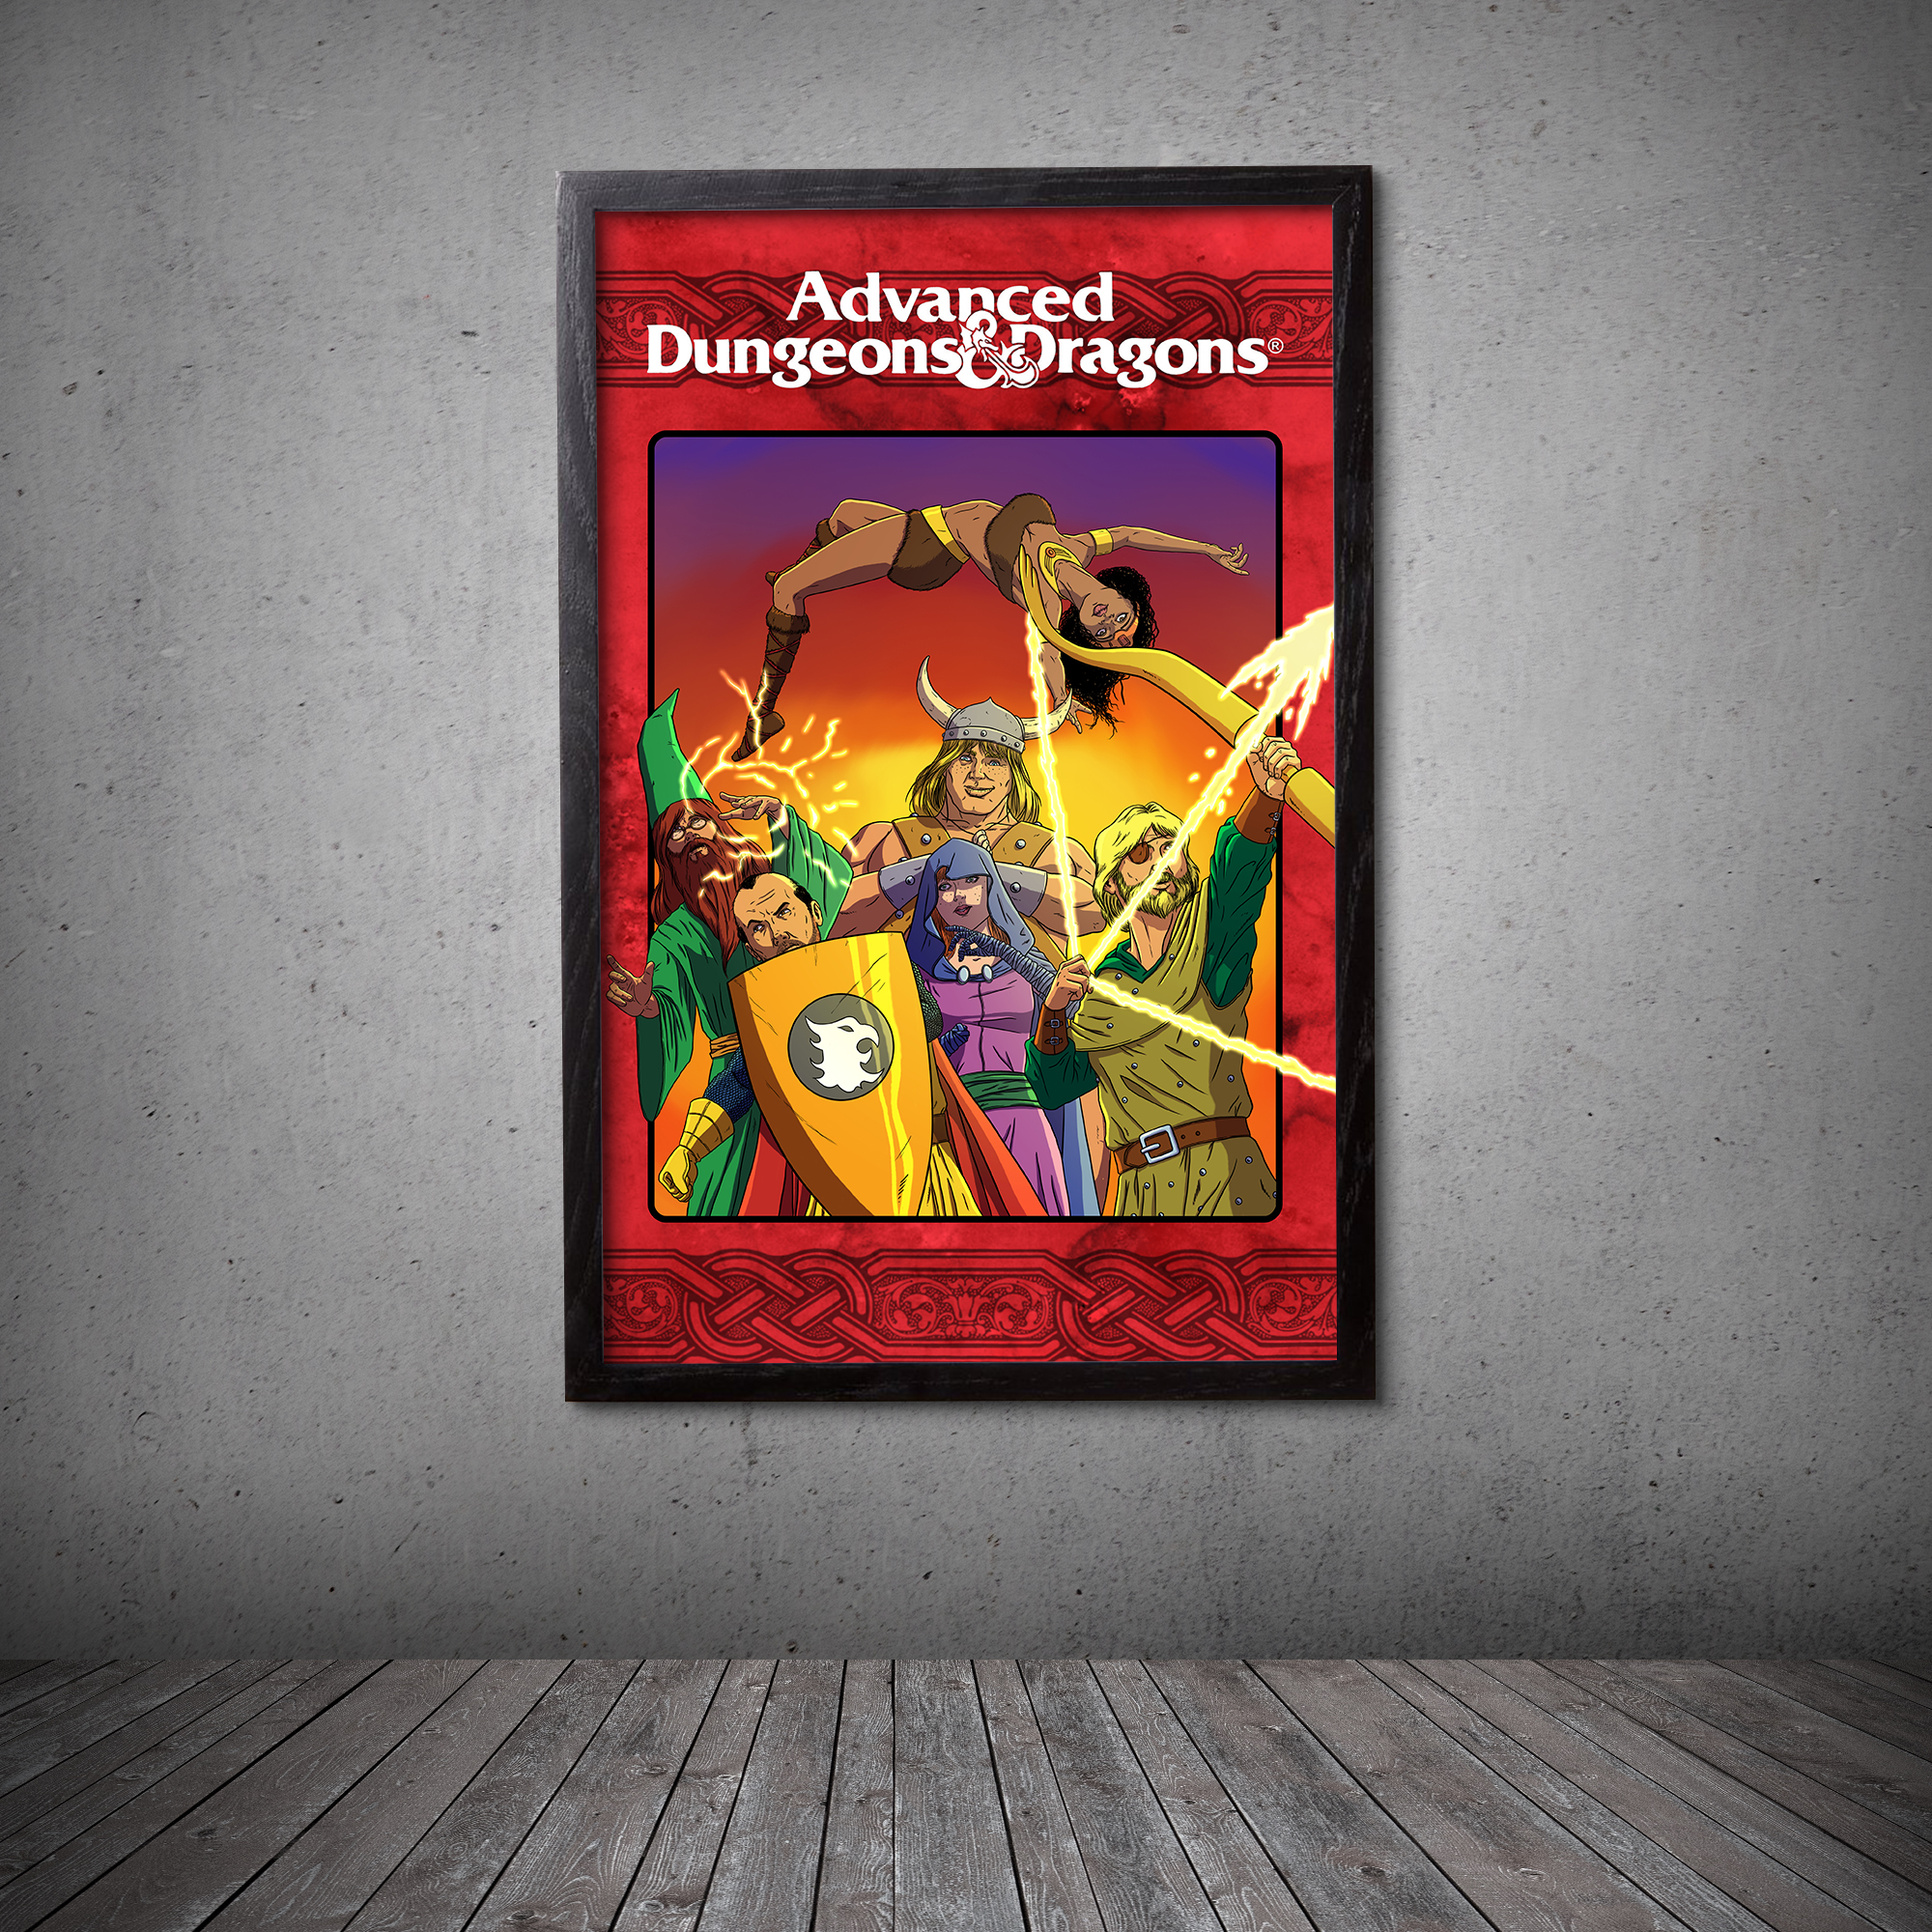 Advanced Dungeons & Dragons by Duke